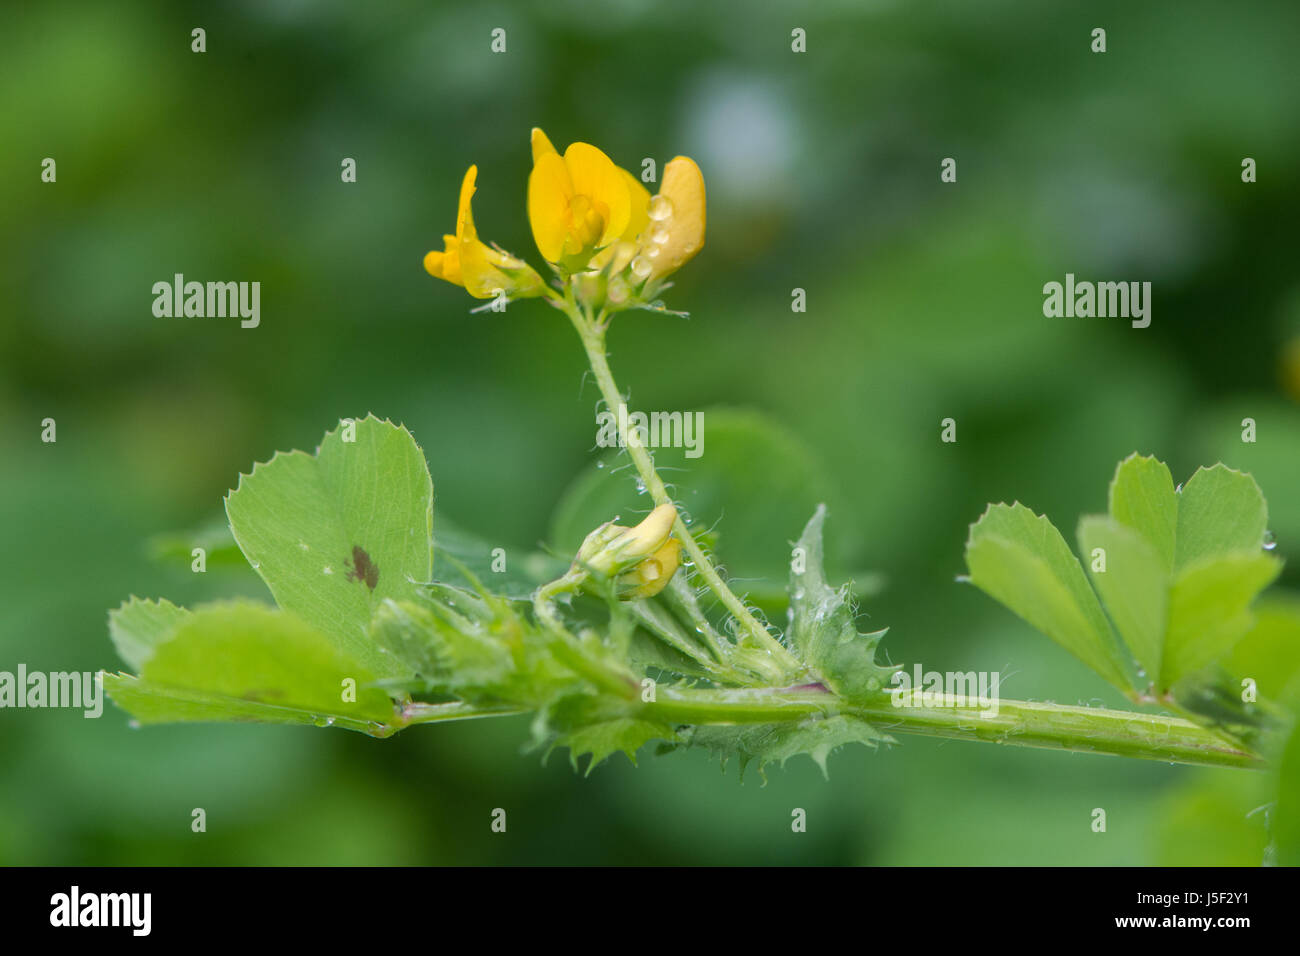 Spotted medick (Medicago arabica) in flower. Yellow flower and distinctive leaflets with dark blotch in centre of plant in pea family (Fabaceae) Stock Photo